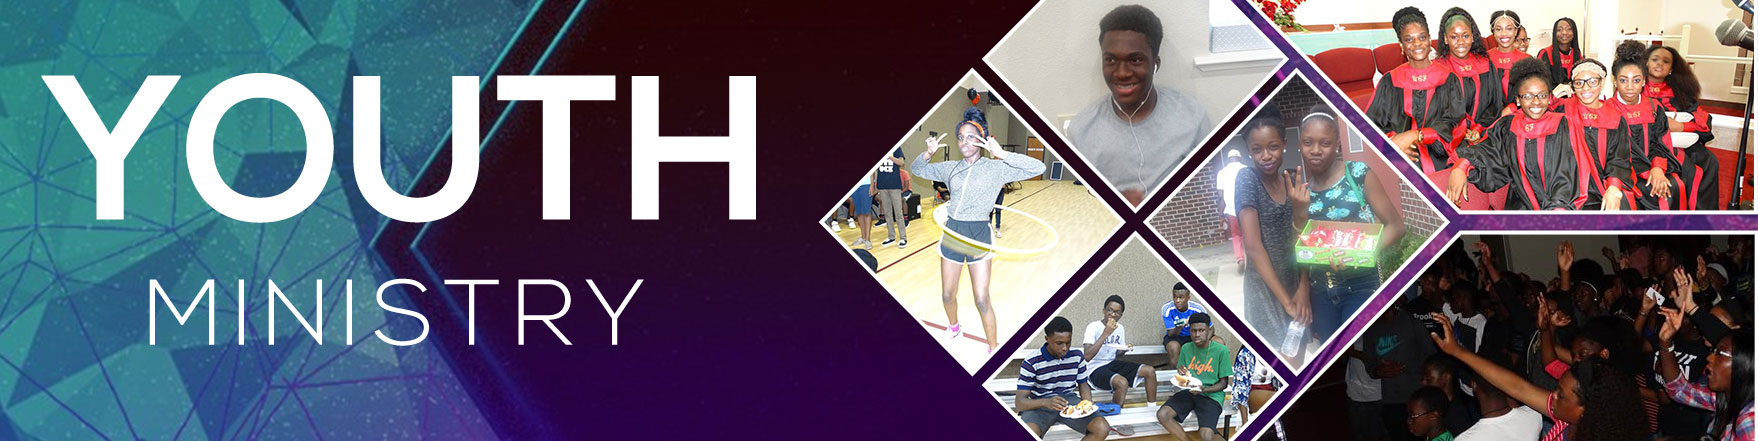 UCF-Youth-Ministry-Banner-2.jpg